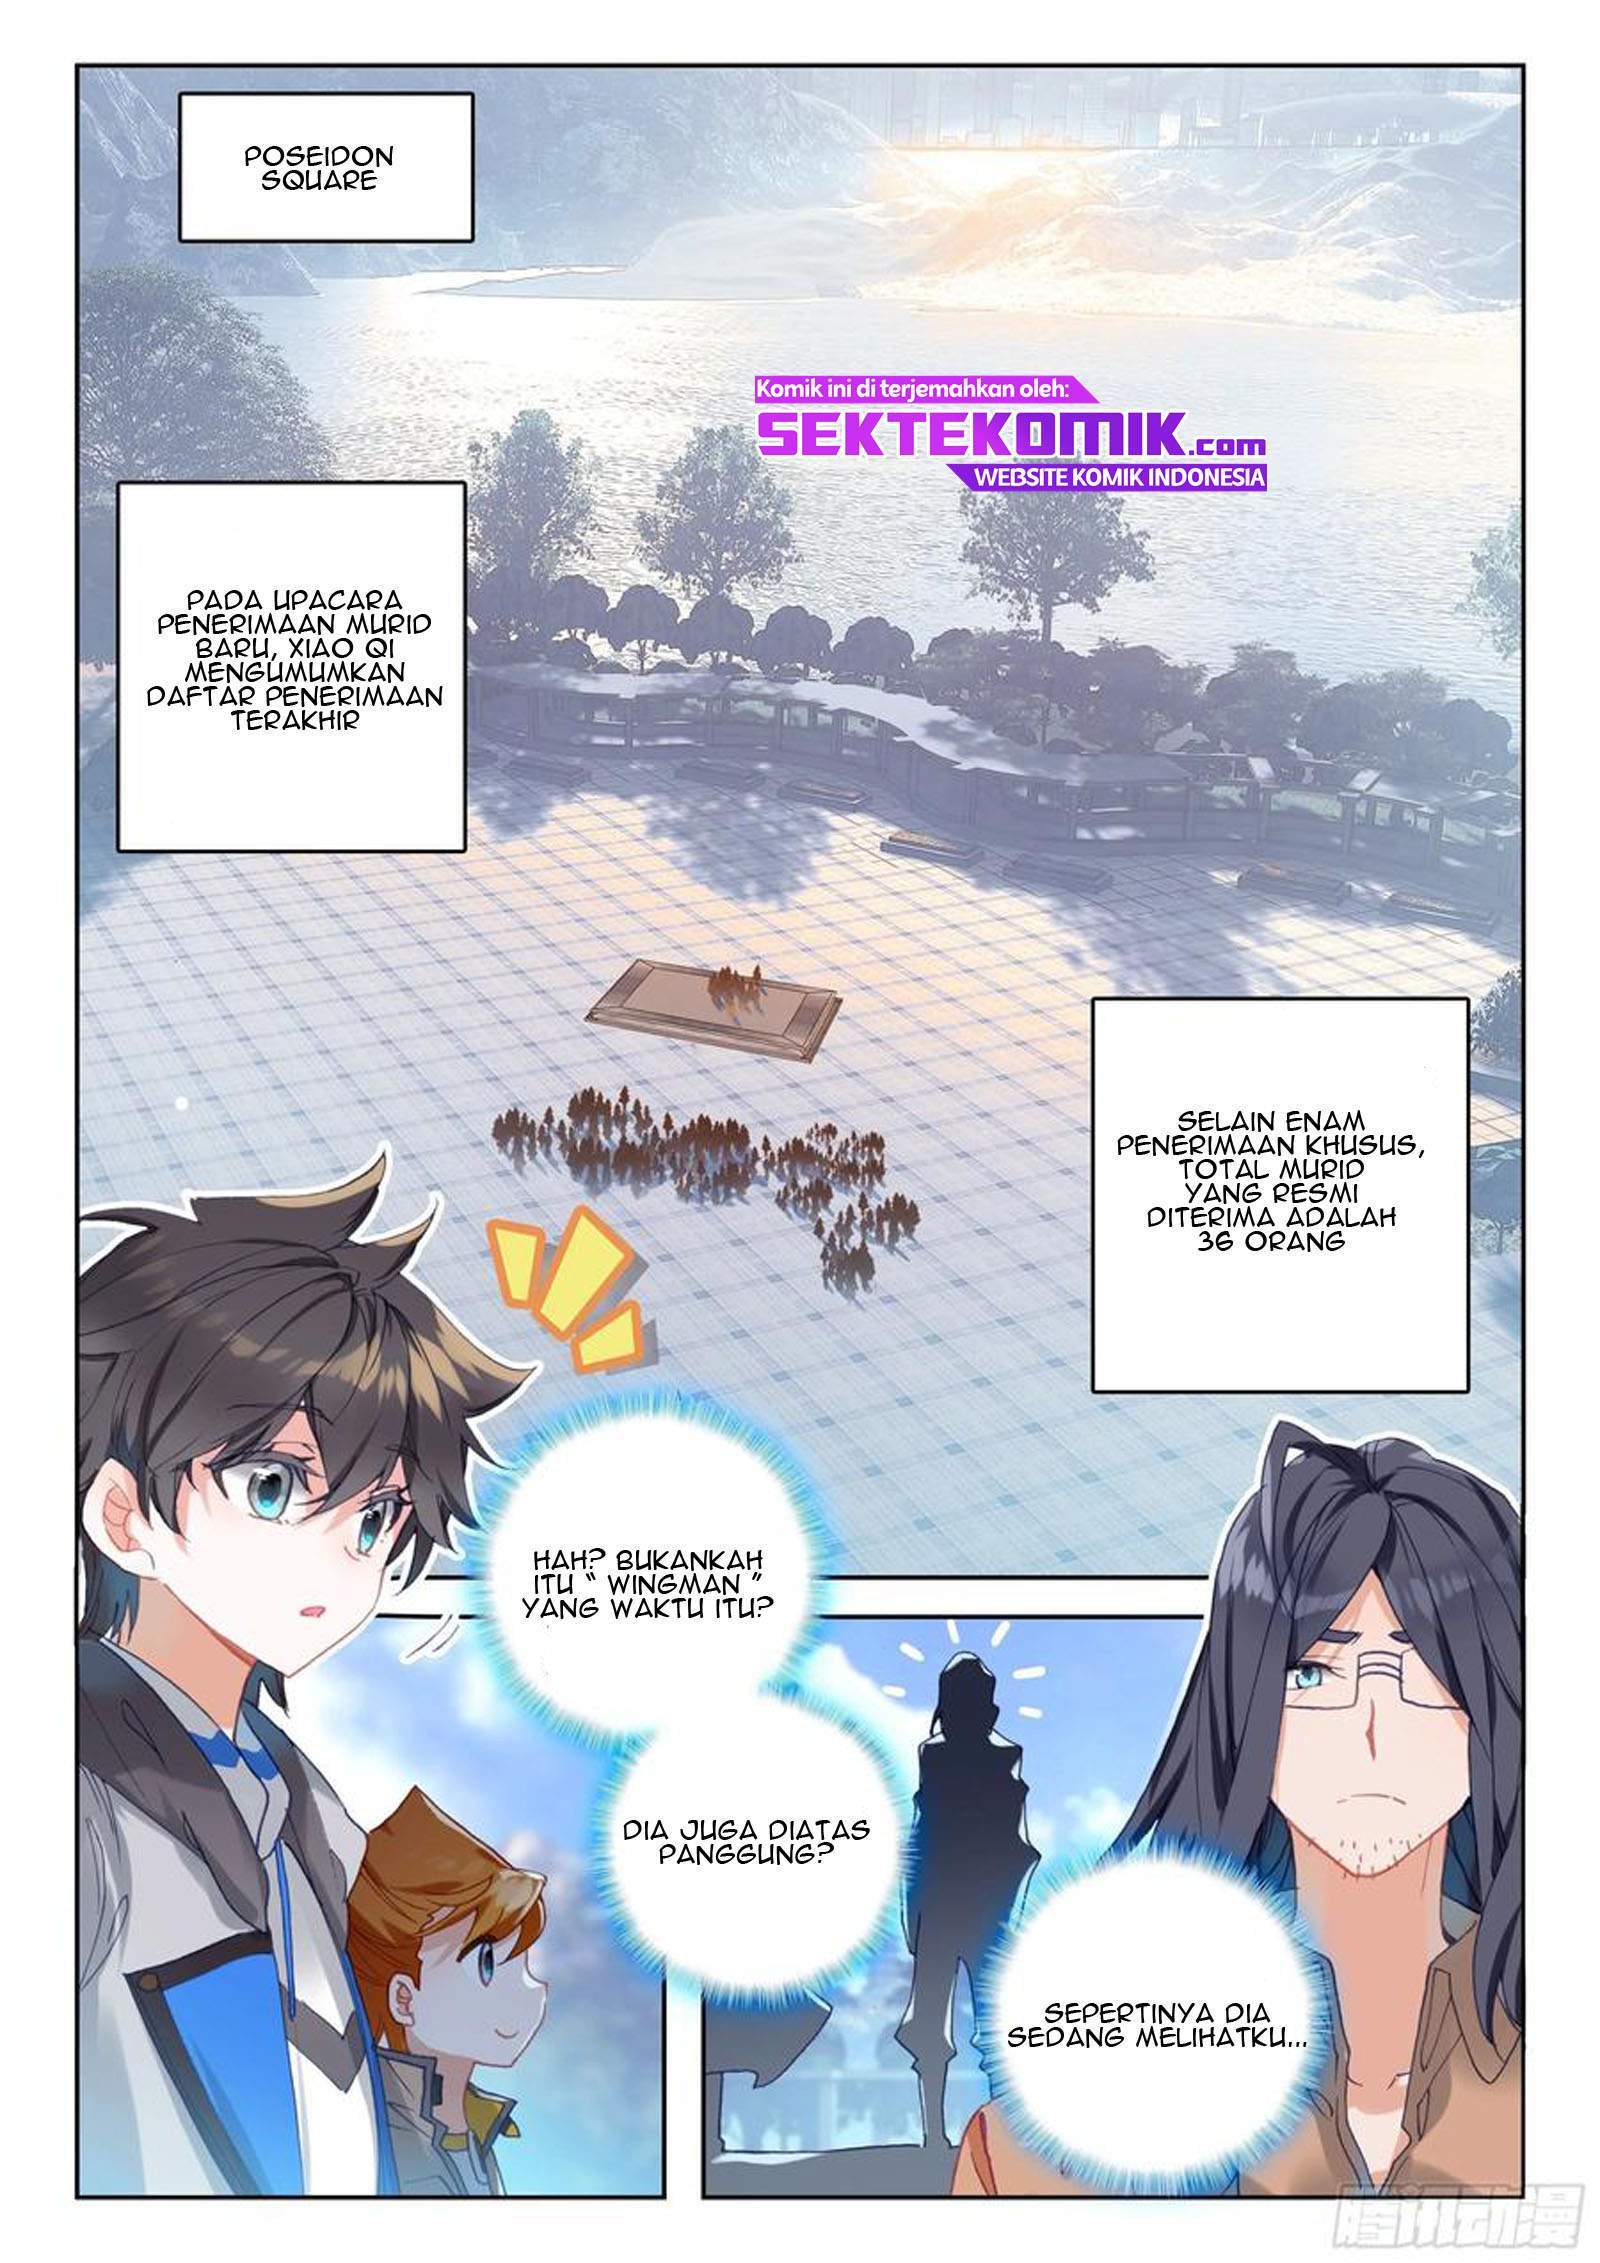 Soul Land IV - The Ultimate Combats Chapter 159